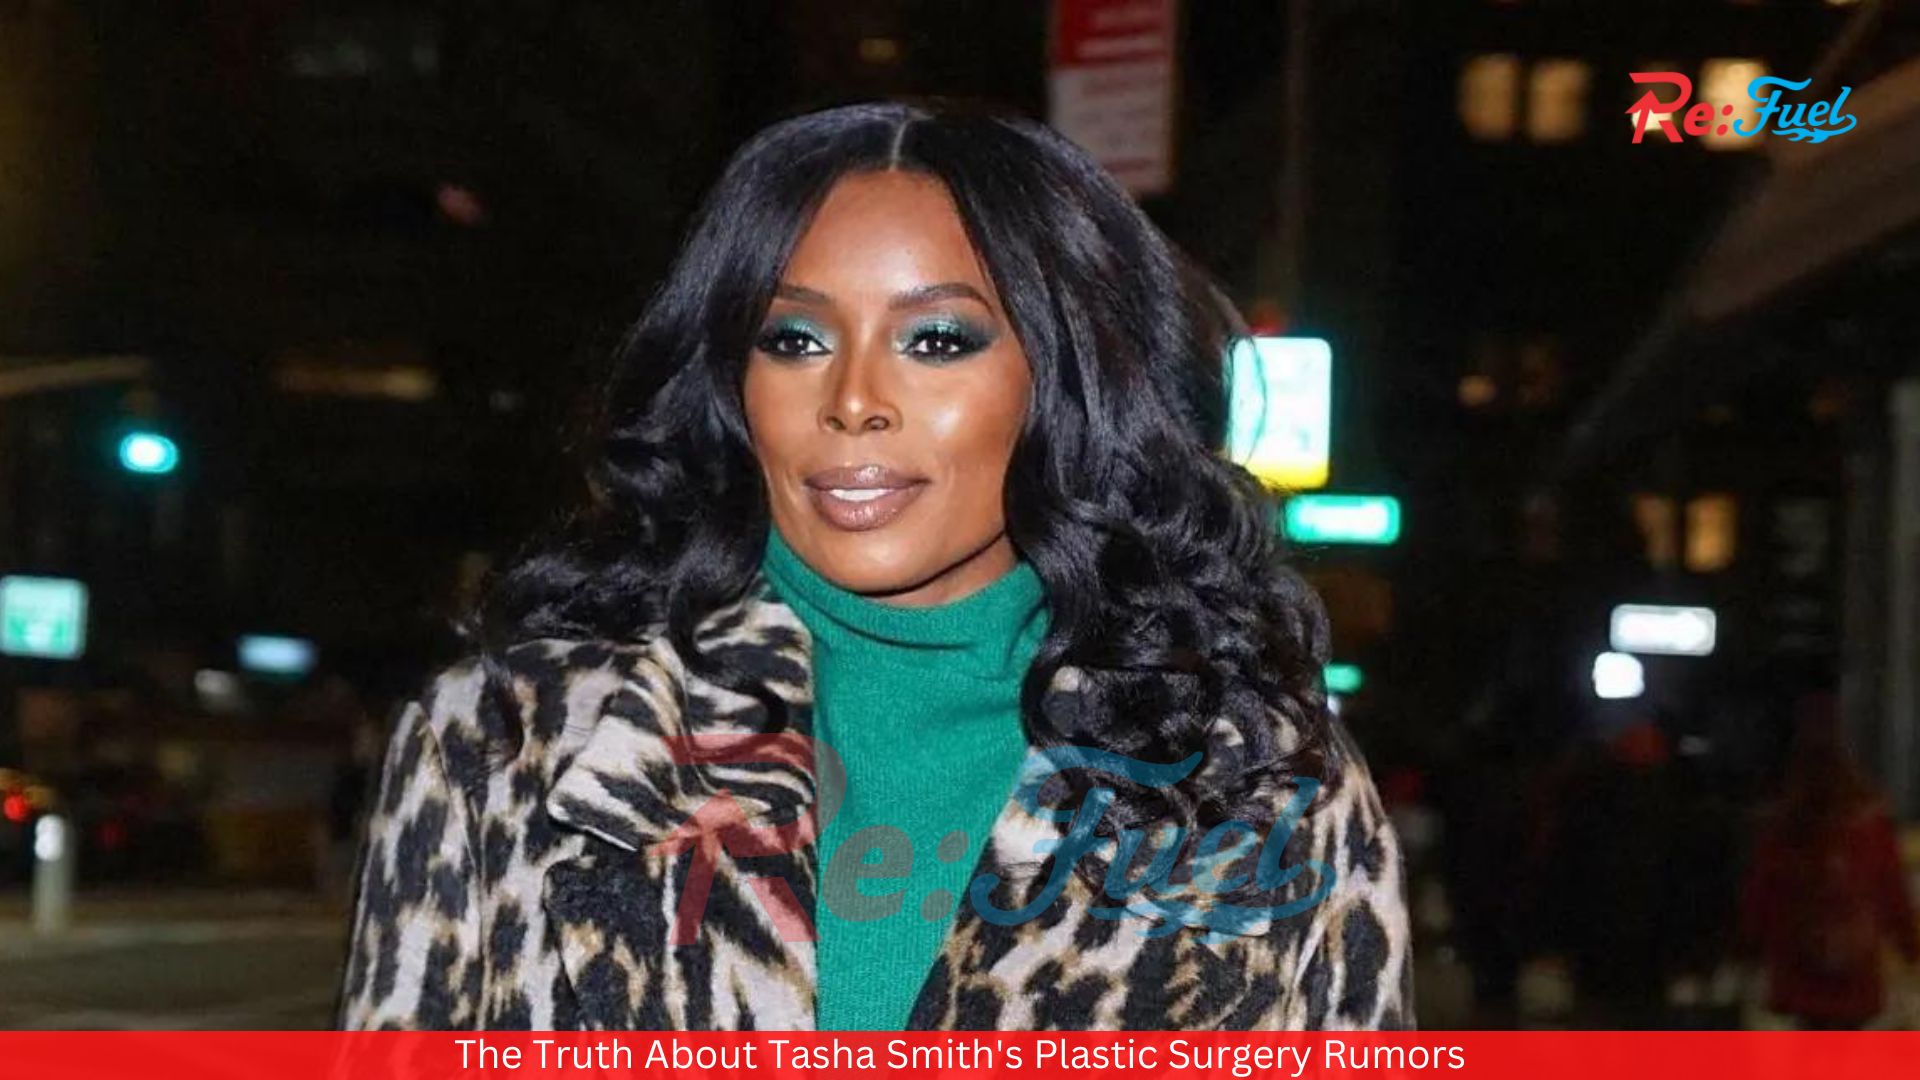 The Truth About Tasha Smith's Plastic Surgery Rumors